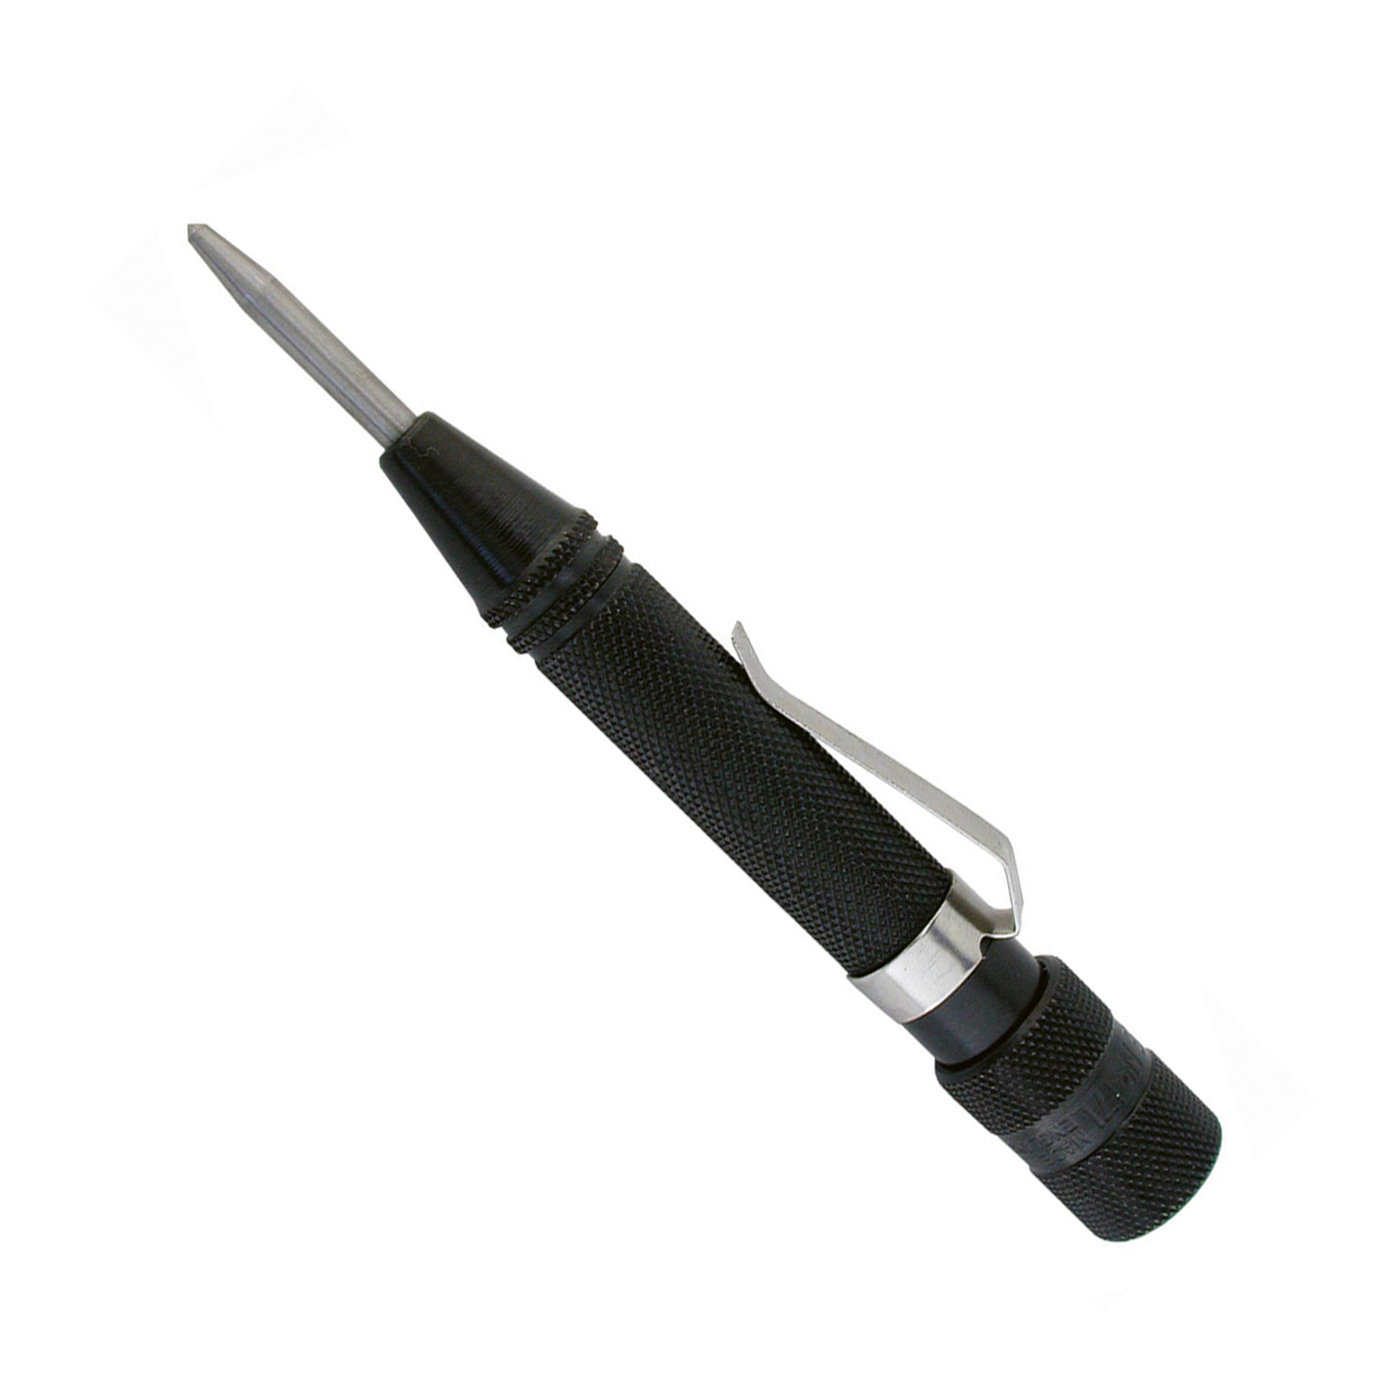 Center Punch, Automatic, 120 mm - 1 piece